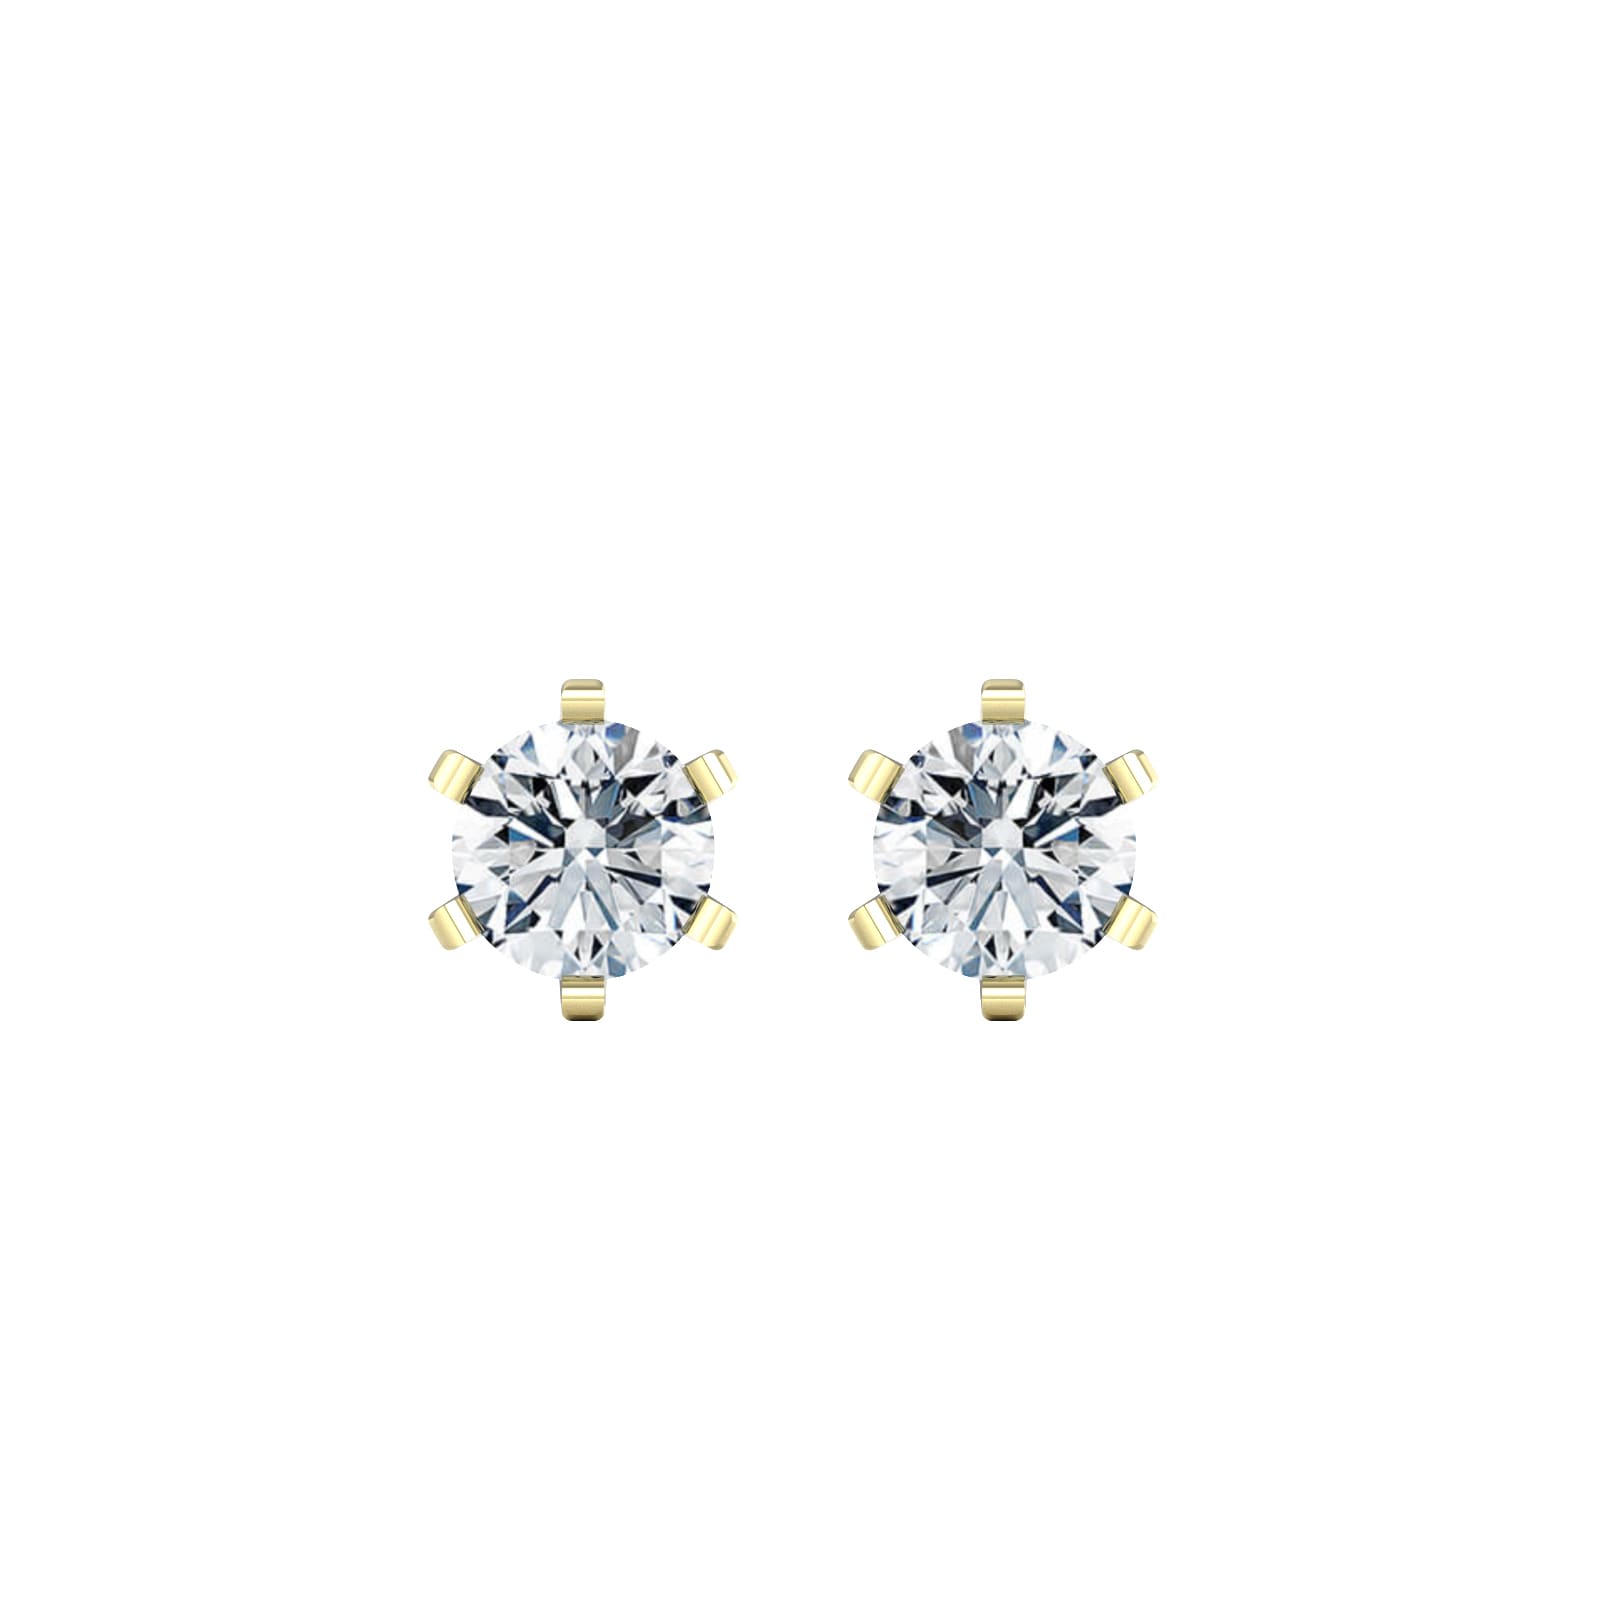 9ct Yellow Gold 0.50cttw Solitaire Diamond Stud Earrings